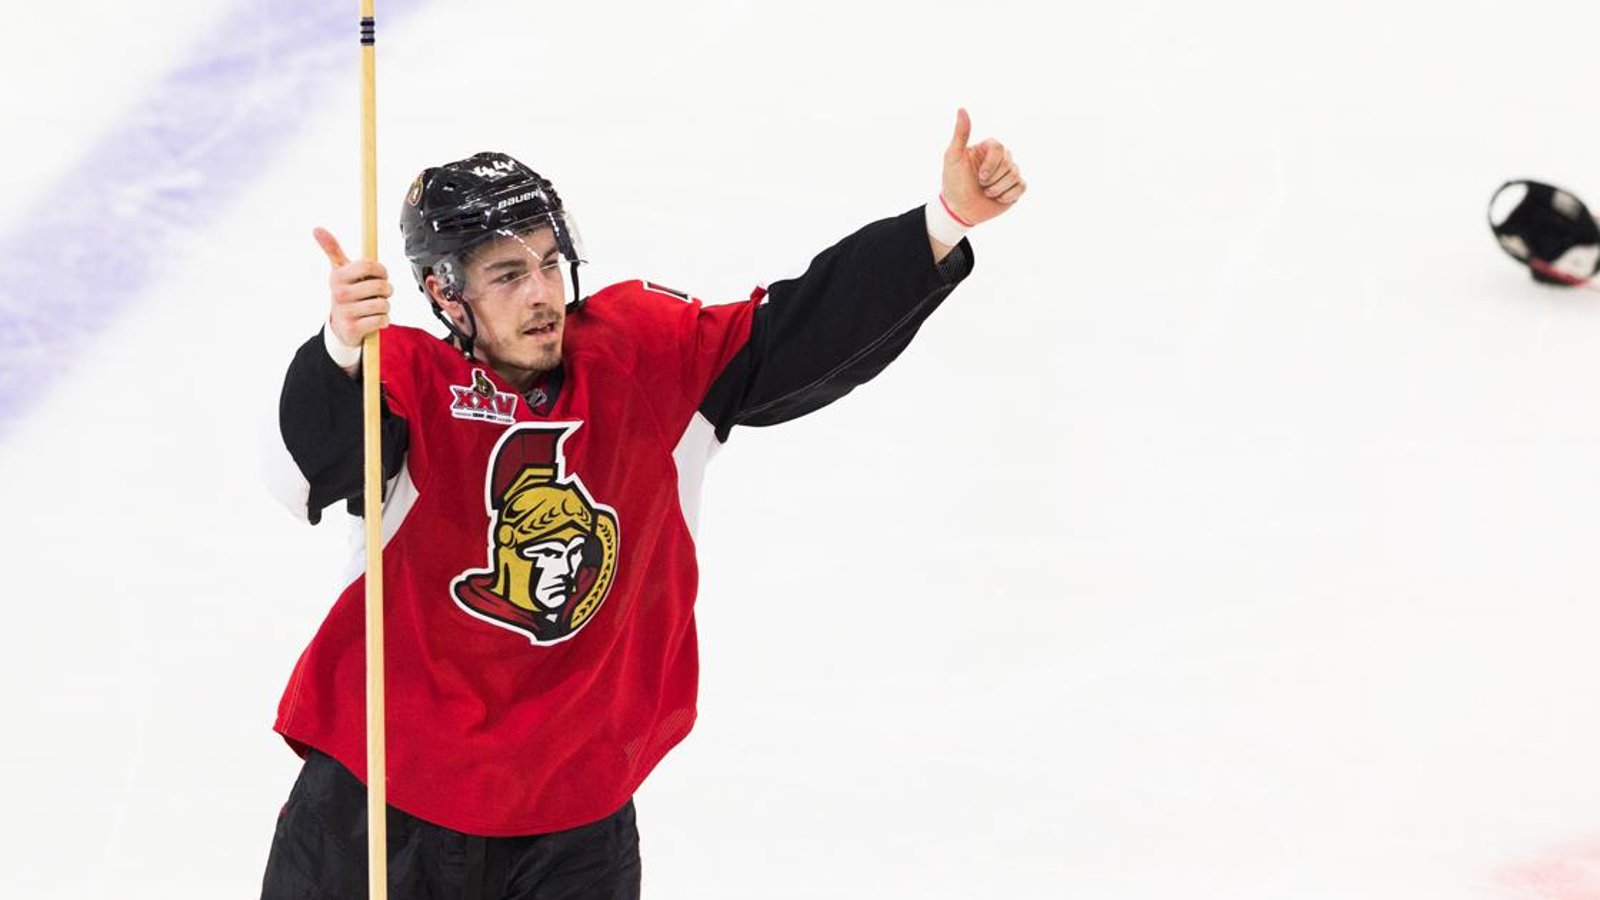 Echoes from the Sens locker room following historic Pageau's surge. 